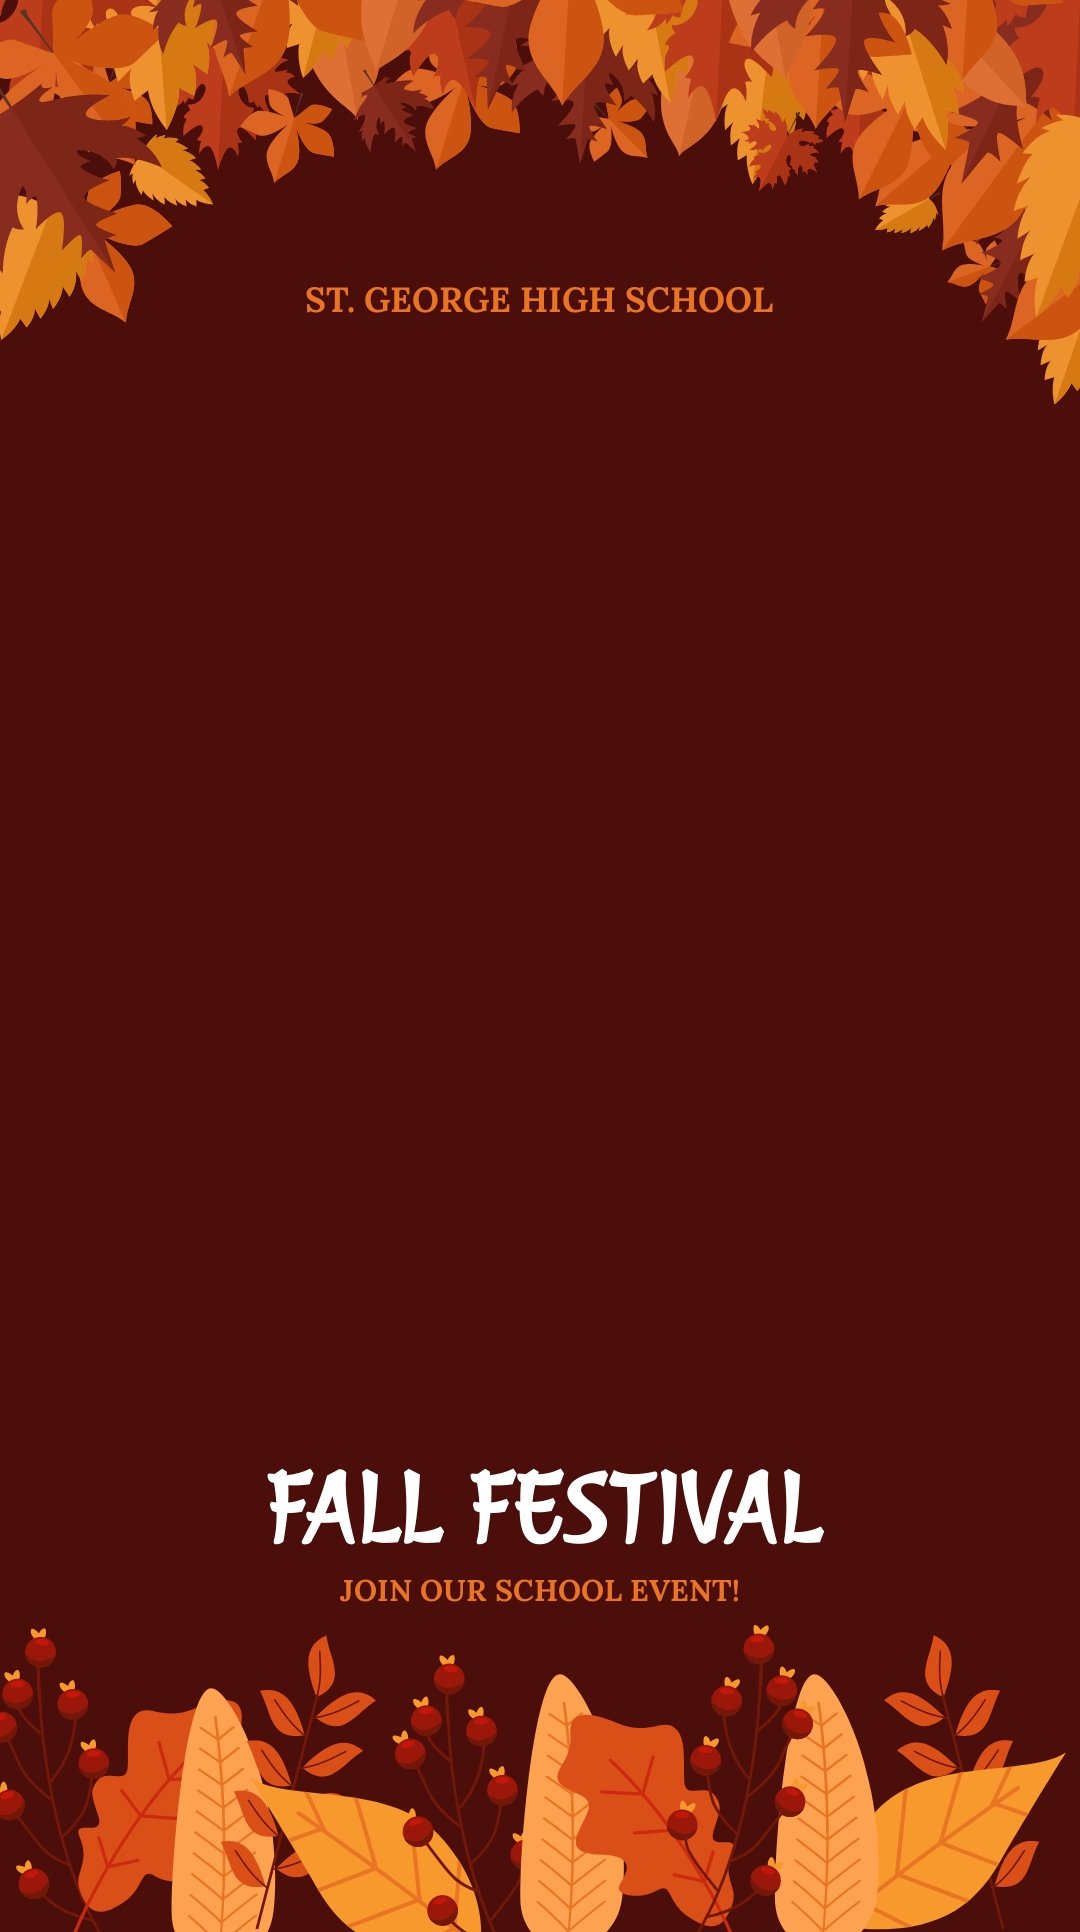 Free Fall/Autumn Event Snapchat Geofilter Template